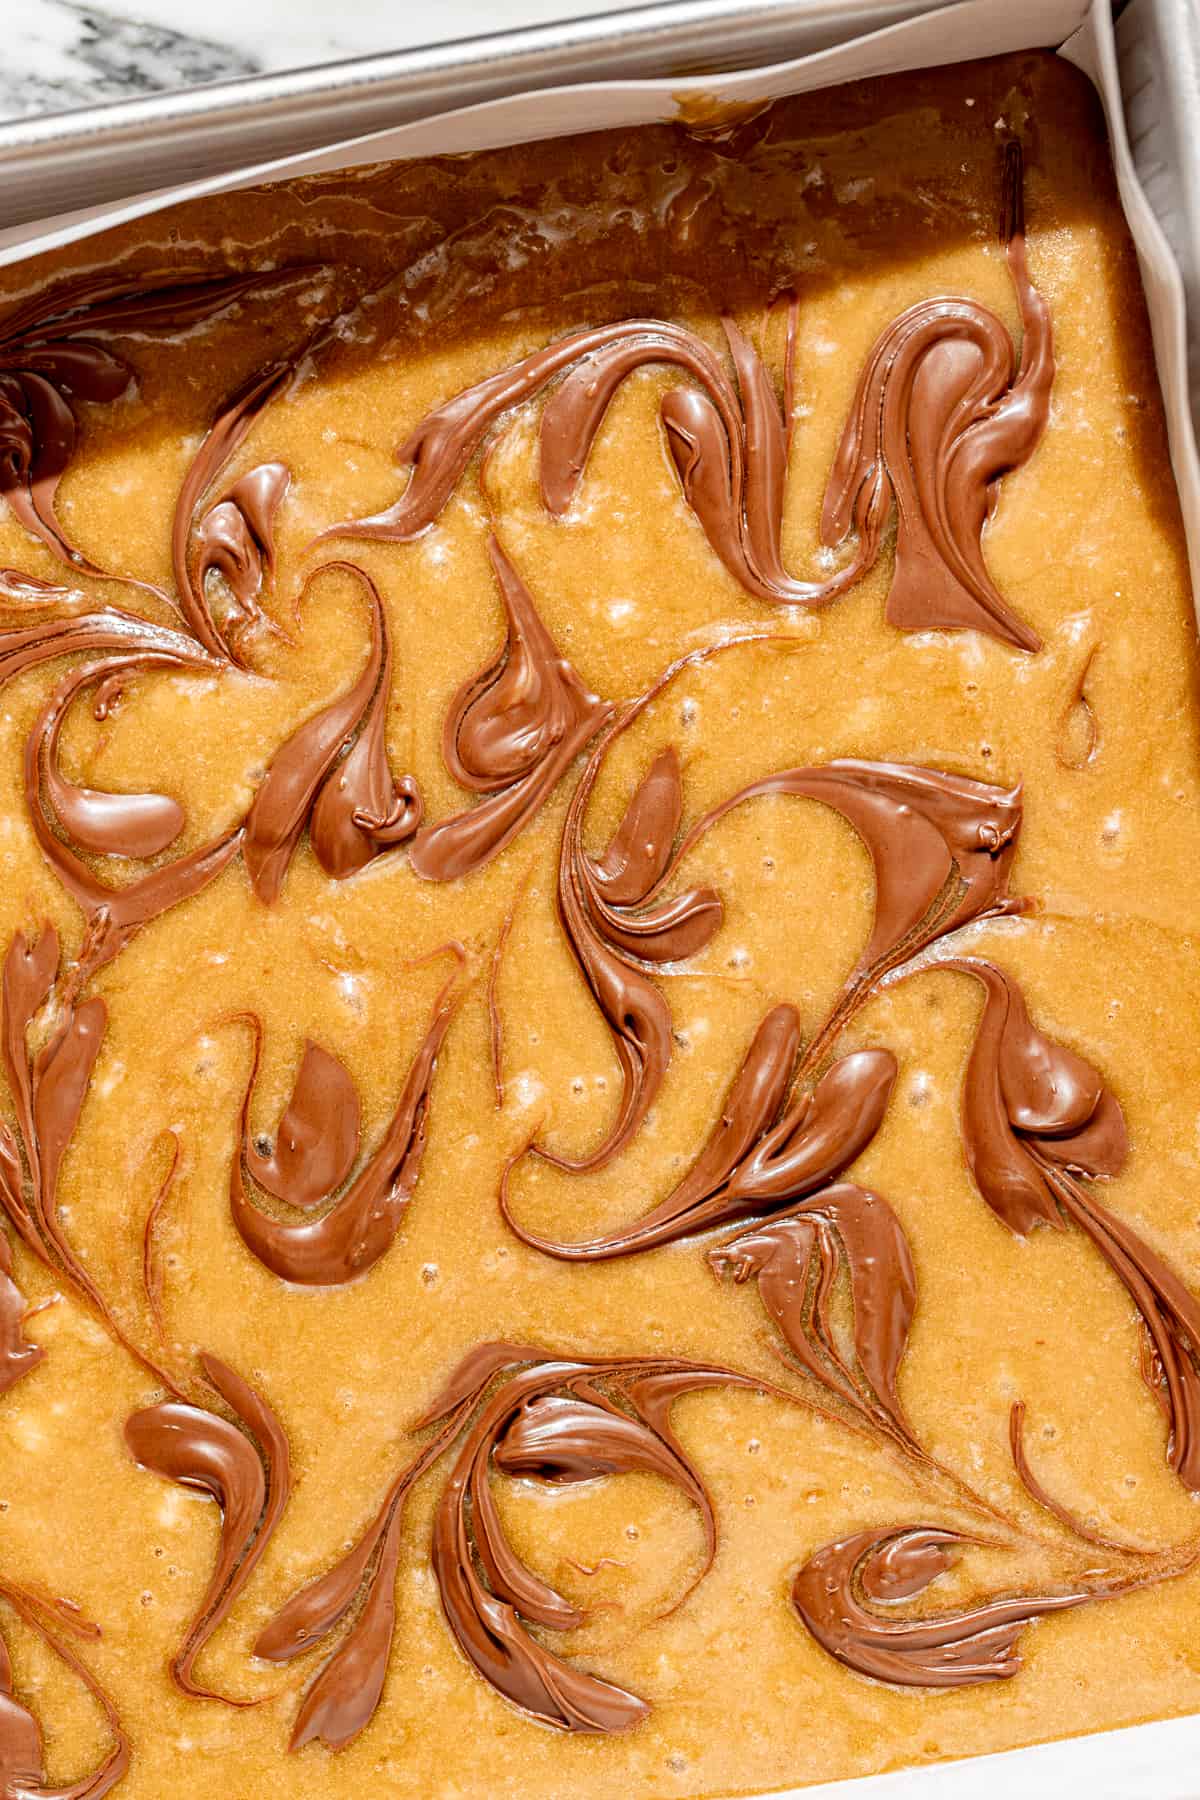 banana blondie batter in baking pan with Nutella swirled on top.